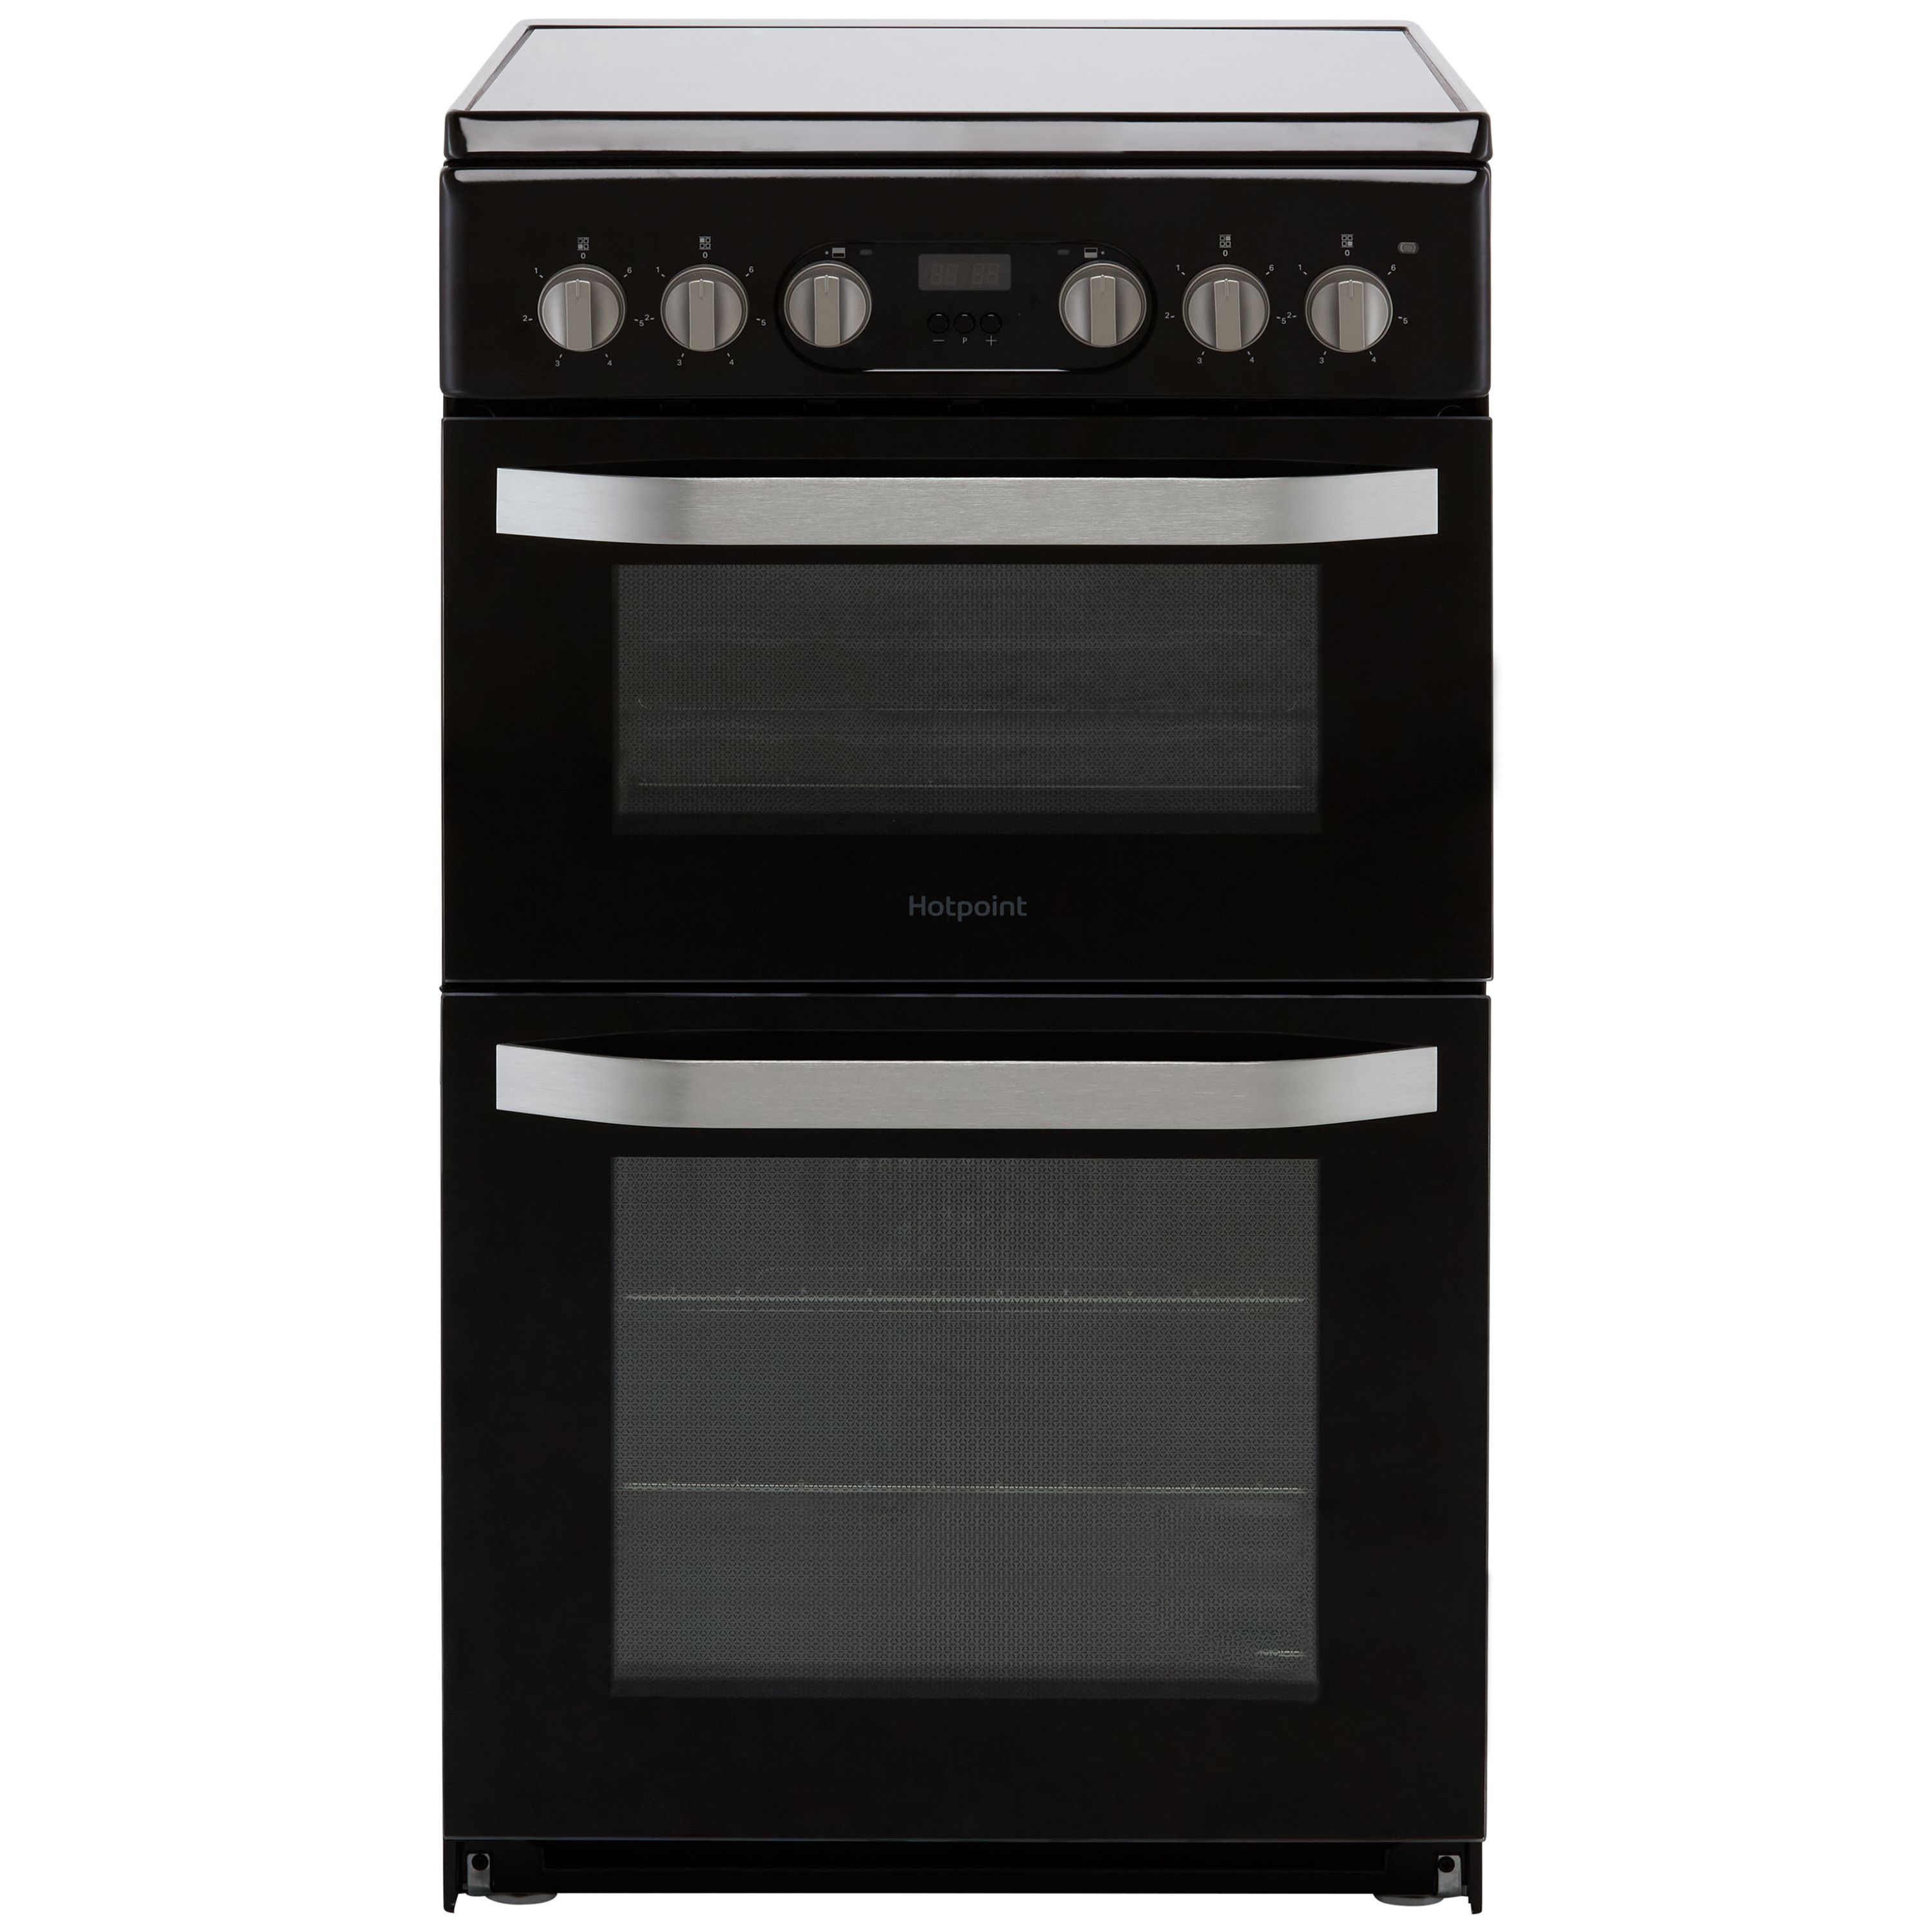 Hotpoint HD5V93CCB/UK_BK 50cm Double Electric Cooker with Ceramic Hob - Black